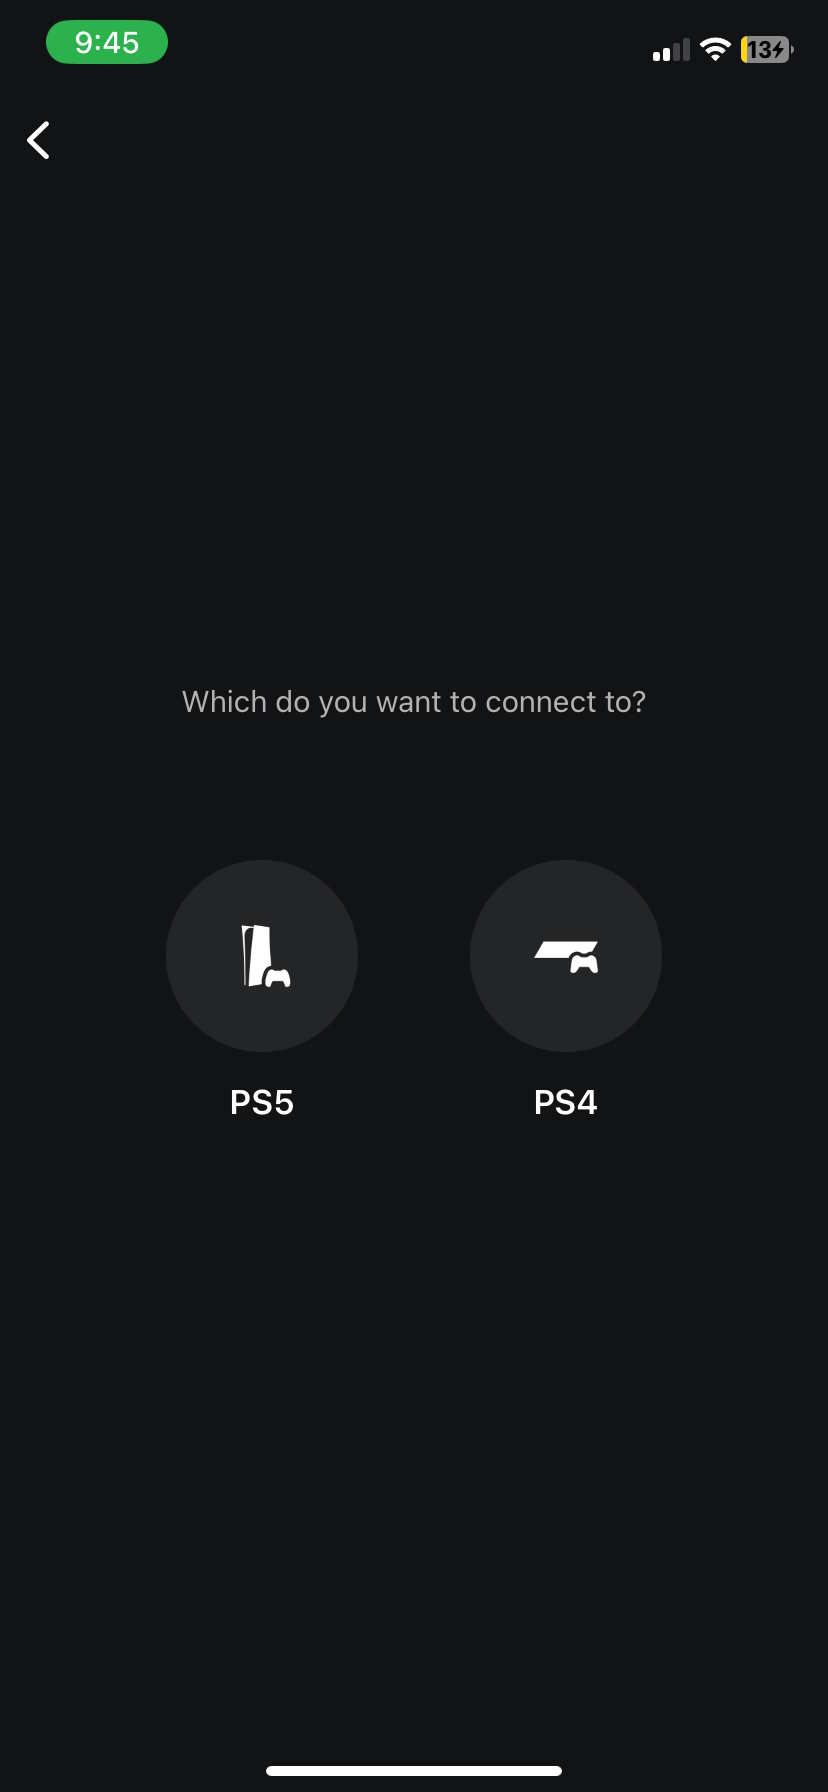 choosing a console to connect to on the PlayStation Remote Play mobile app